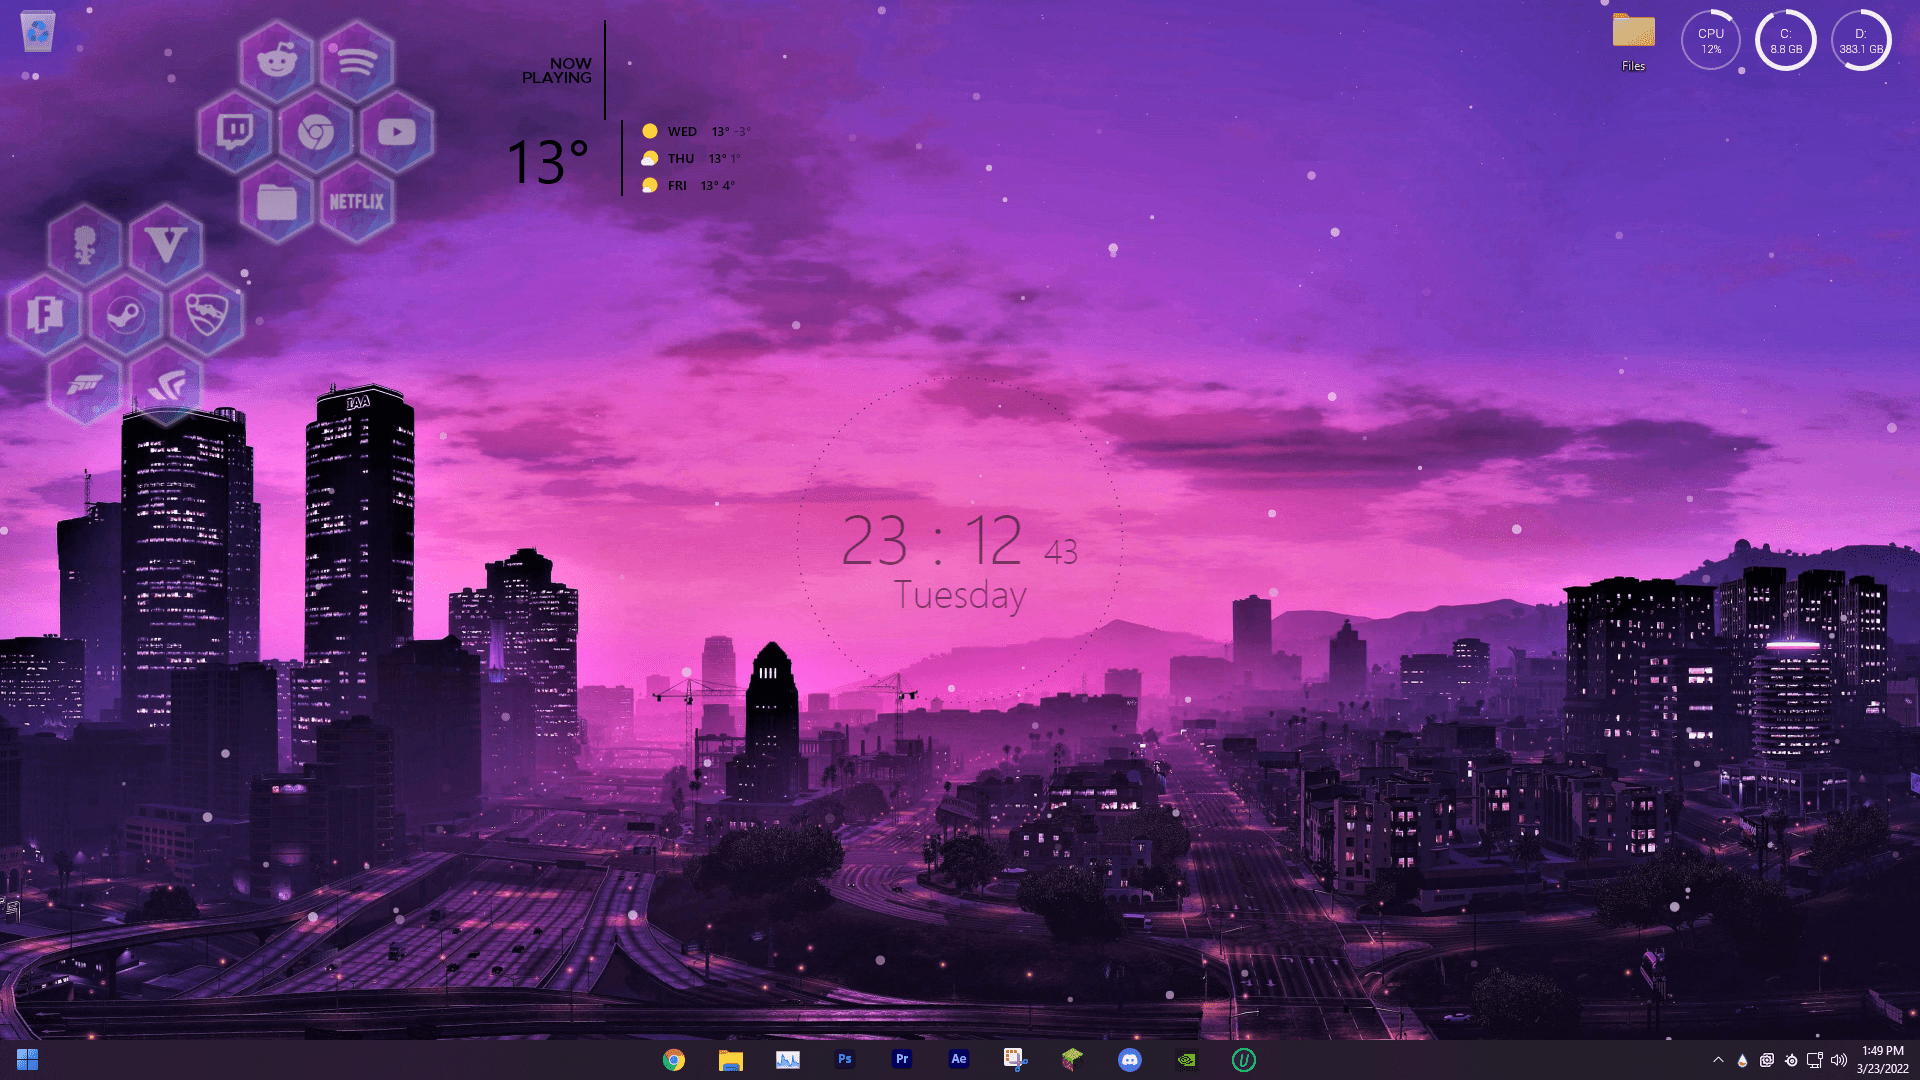 A purple and pink cityscape with a digital clock showing the date as Tuesday, the 23rd. - Windows 11